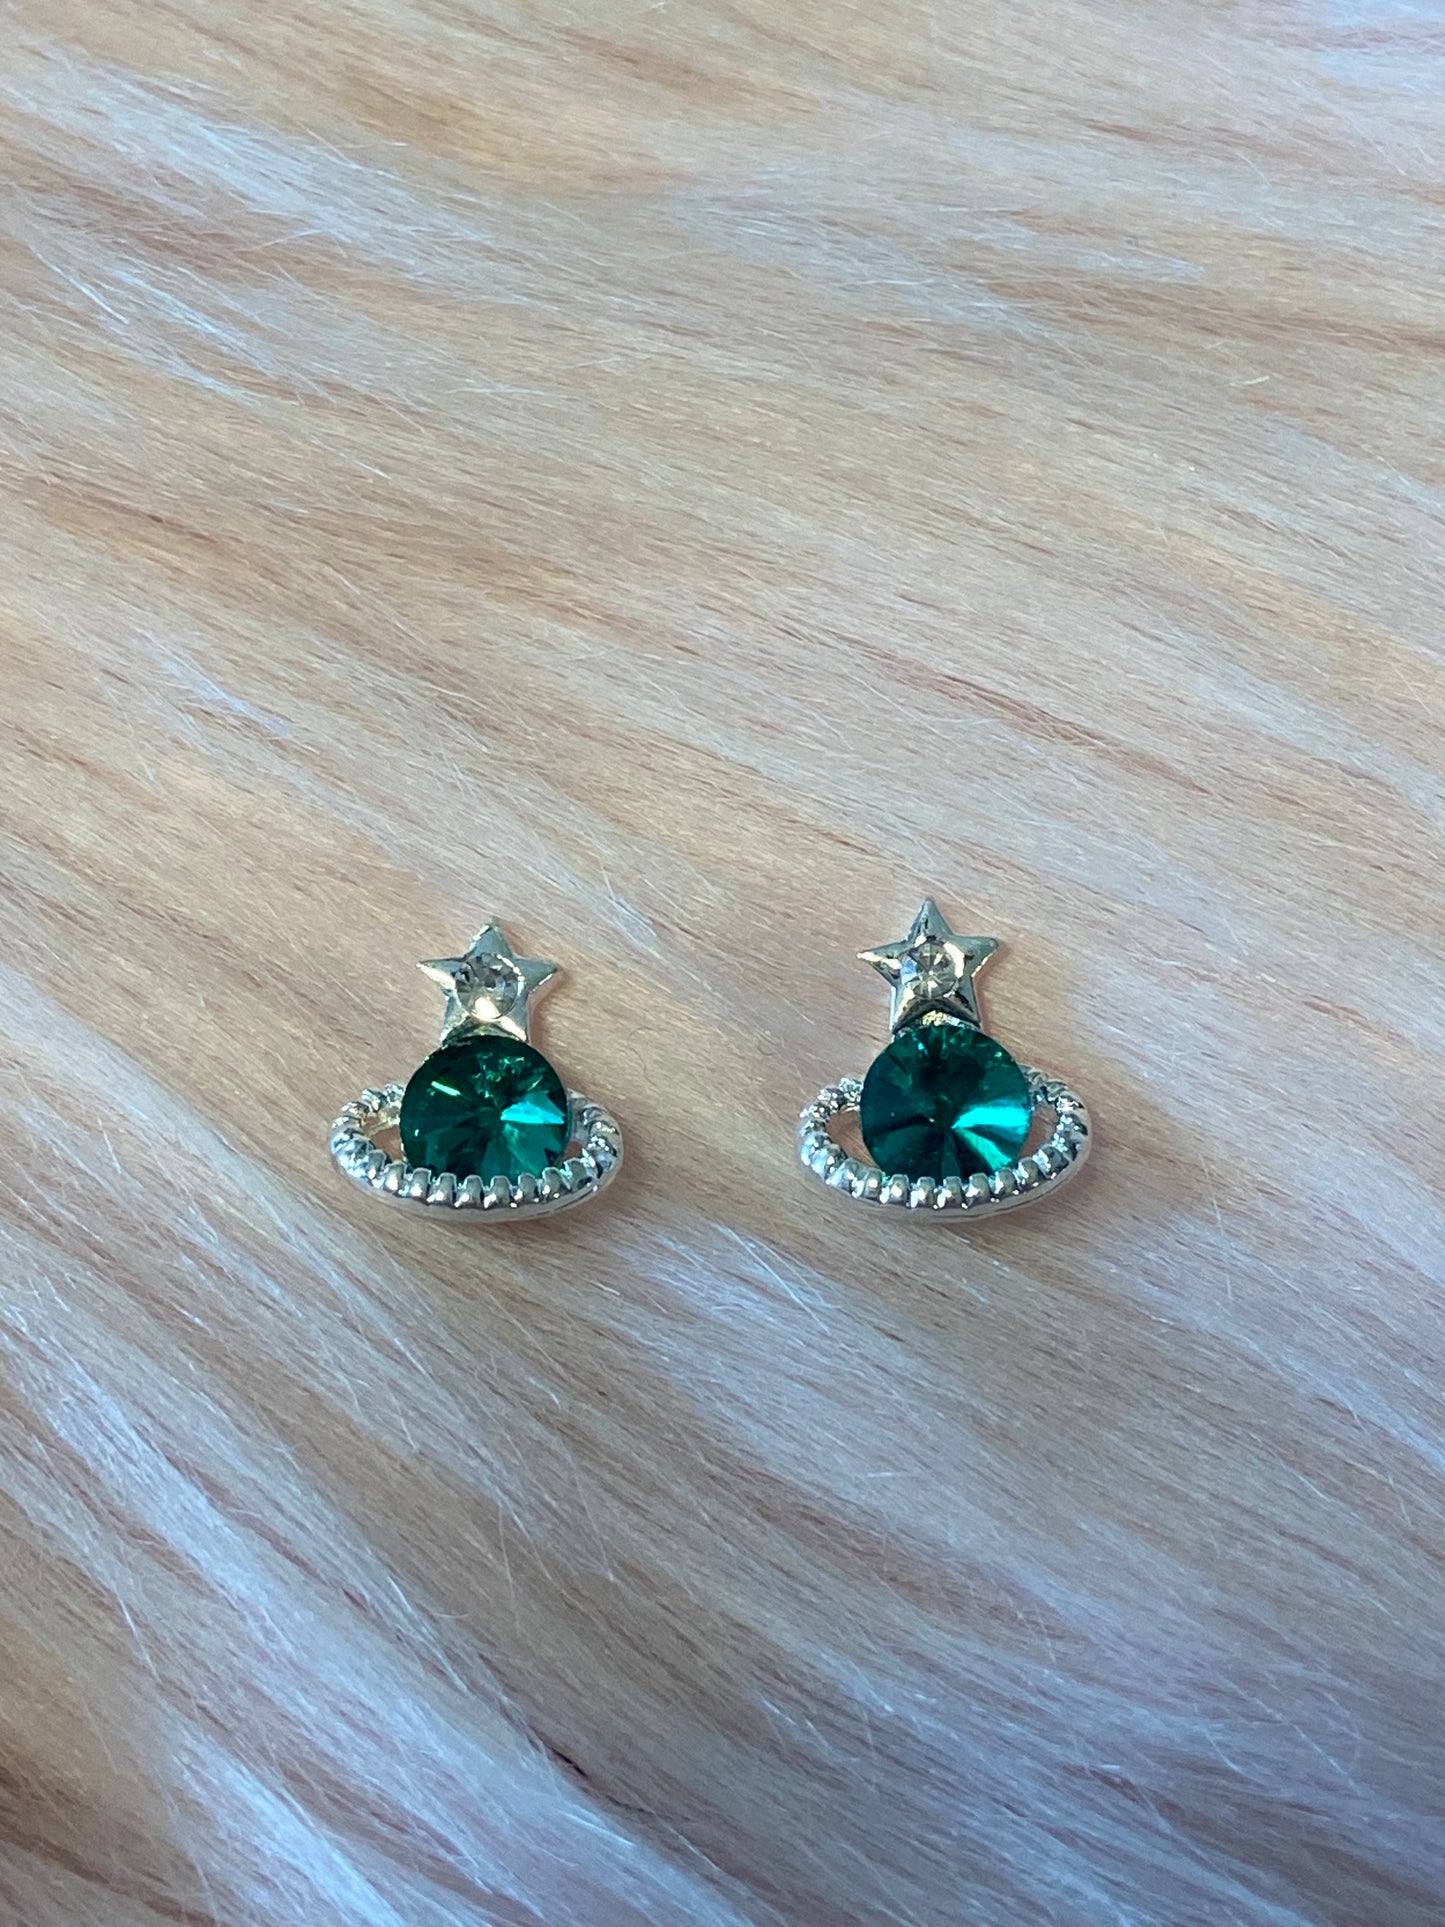 Emerald planet charms